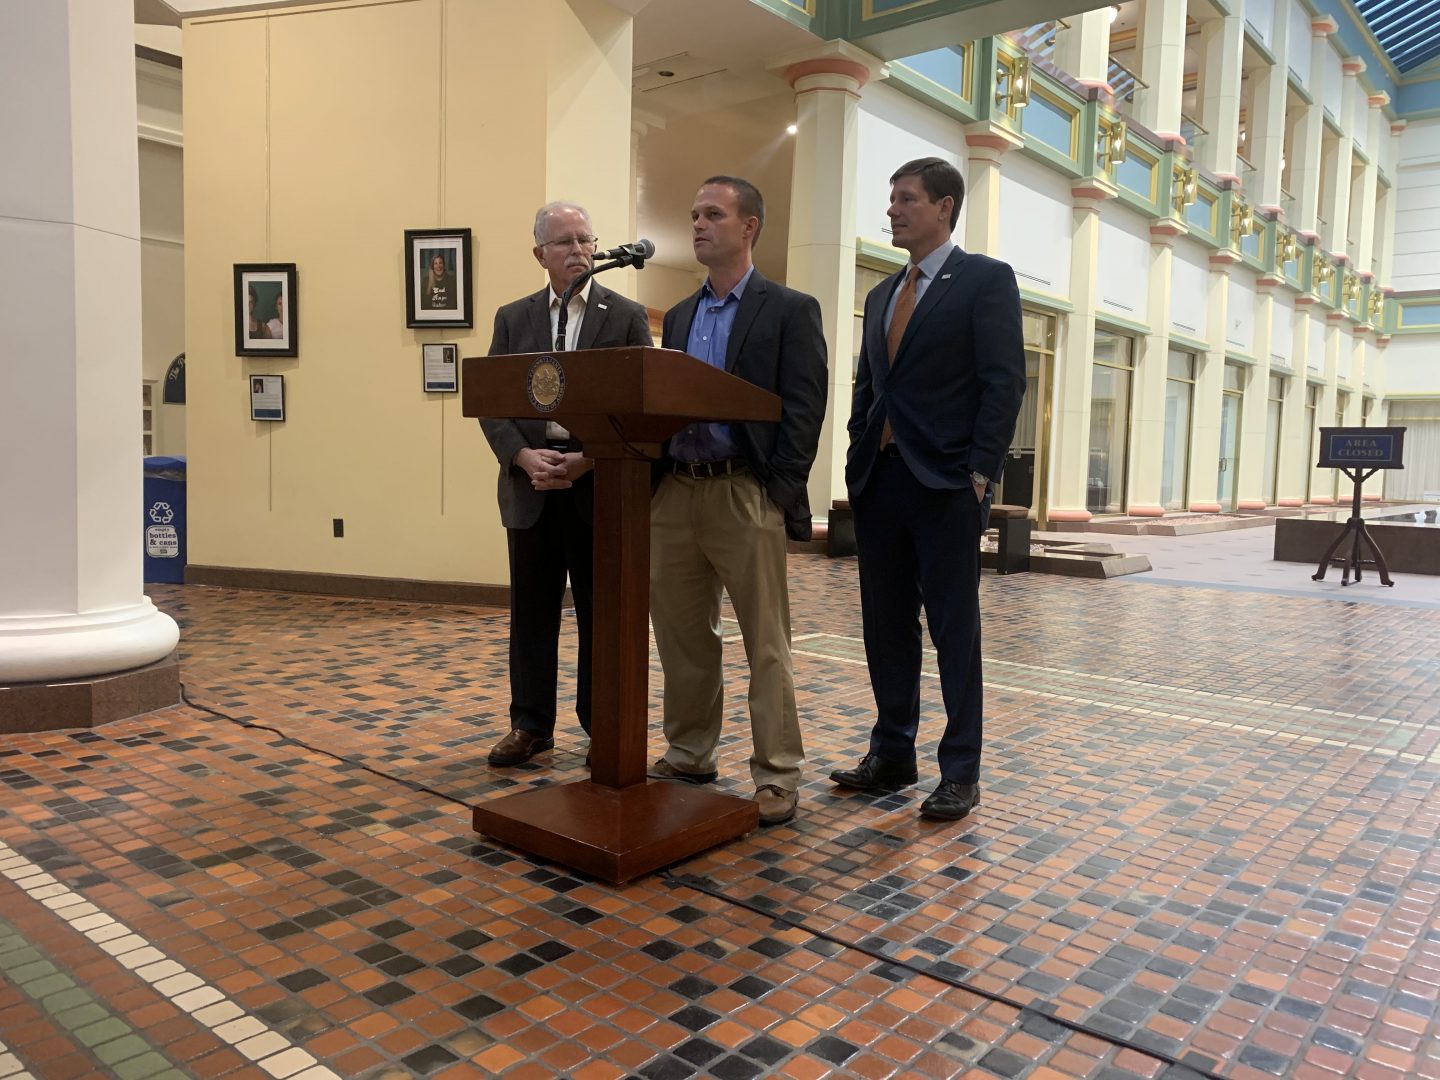 Lead plaintiff David Schaszberger speaks at a Capitol press conference, flanked by one of his attorneys and Mark Janus, the Illinois plaintiff at the heart of the Janus decision that stopped public sector unions from collecting dues from non-members. 